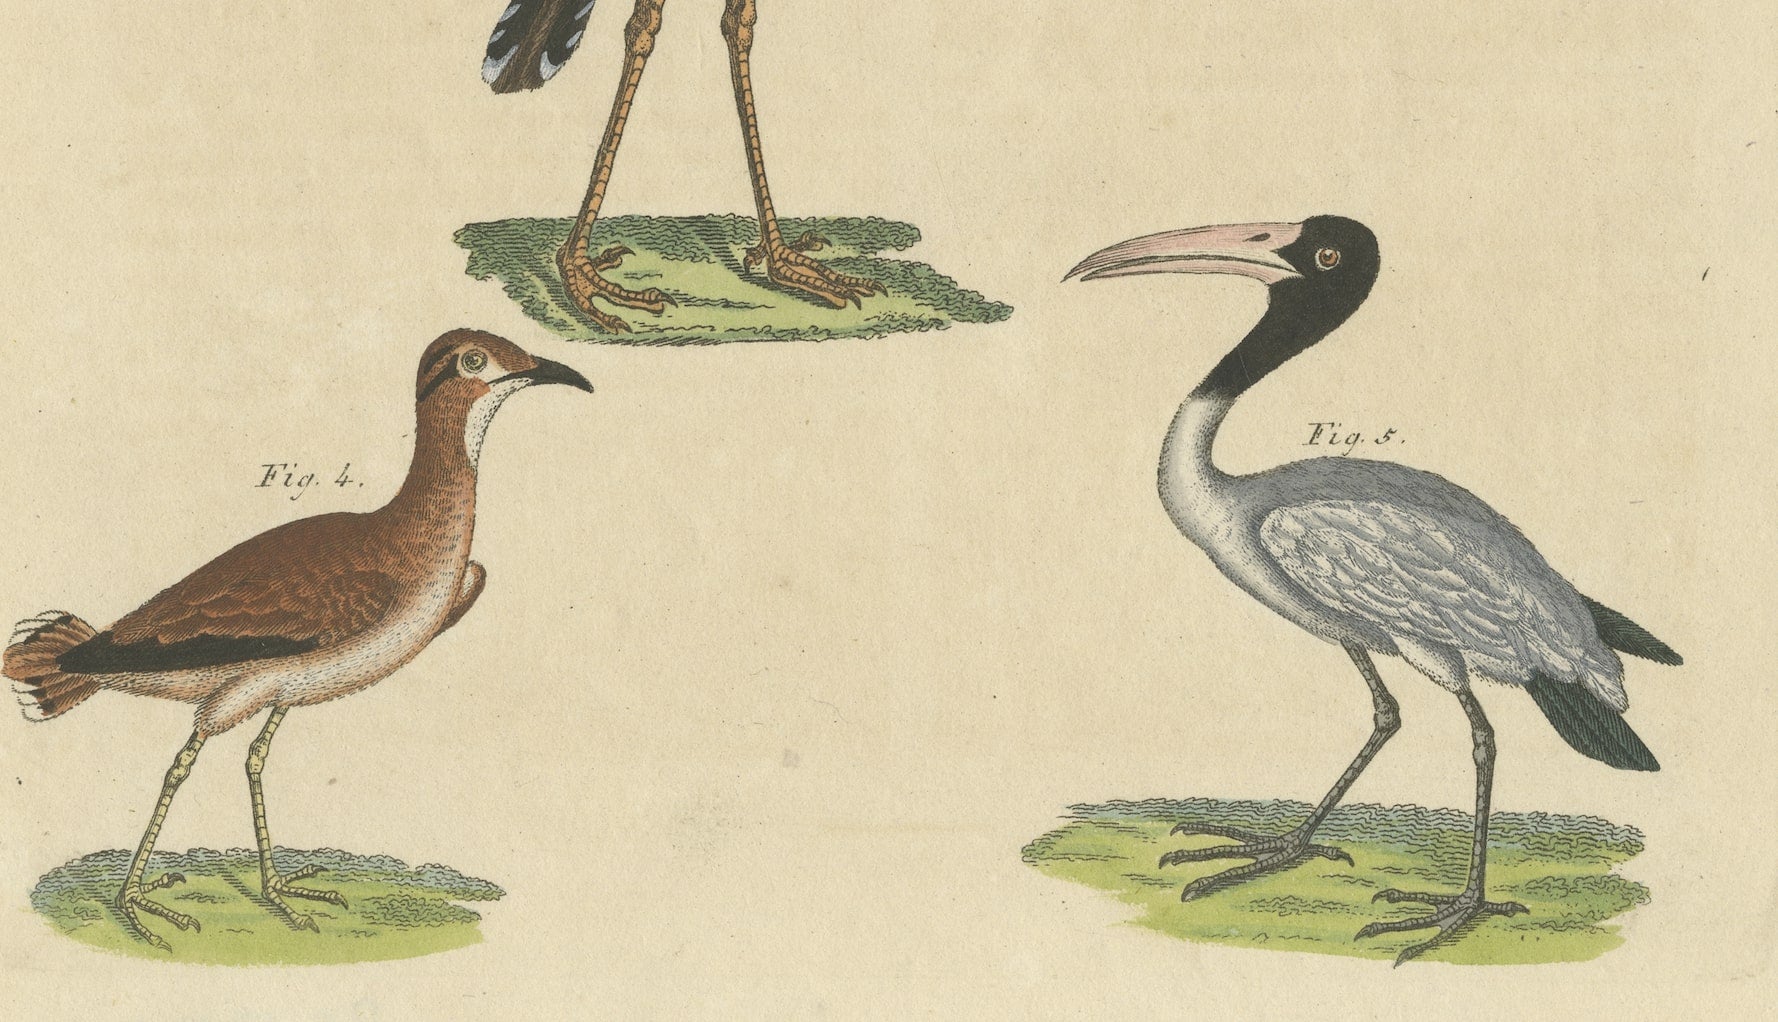 Antique bird print of the Eurasian curlew, Eurasian whimbrel, and other birds. This print originates from 'Bilderbuch fur Kinder' by F.J. Bertuch. Friedrich Johann Bertuch (1747-1822) was a German publisher and man of arts most famous for his